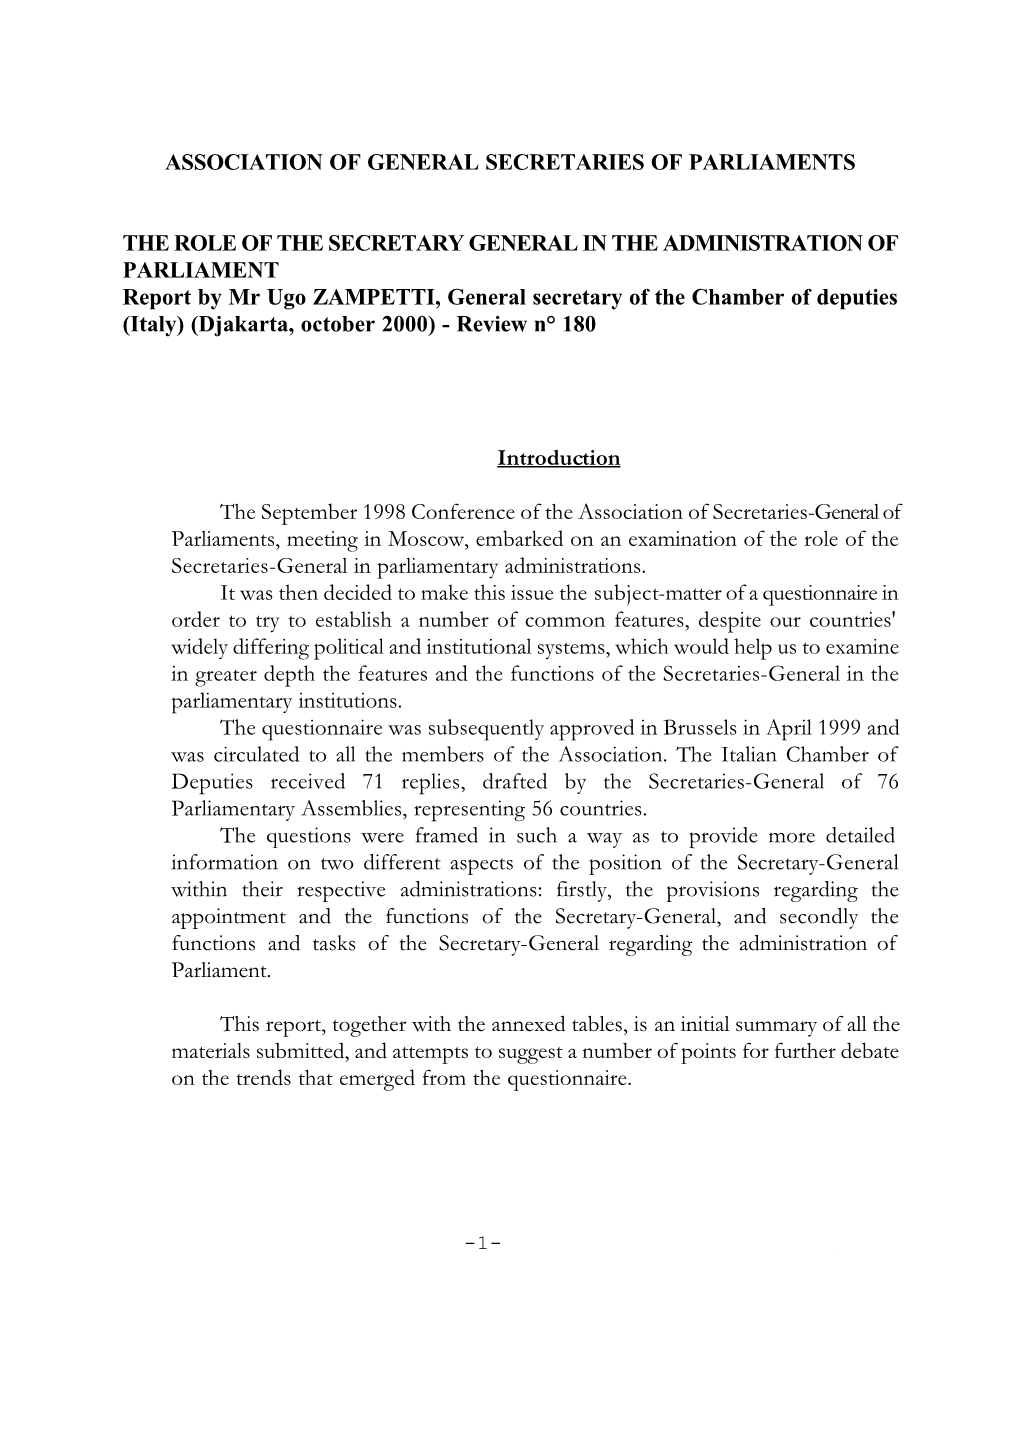 The Role of the Secretary General in the Administration of Parliaments